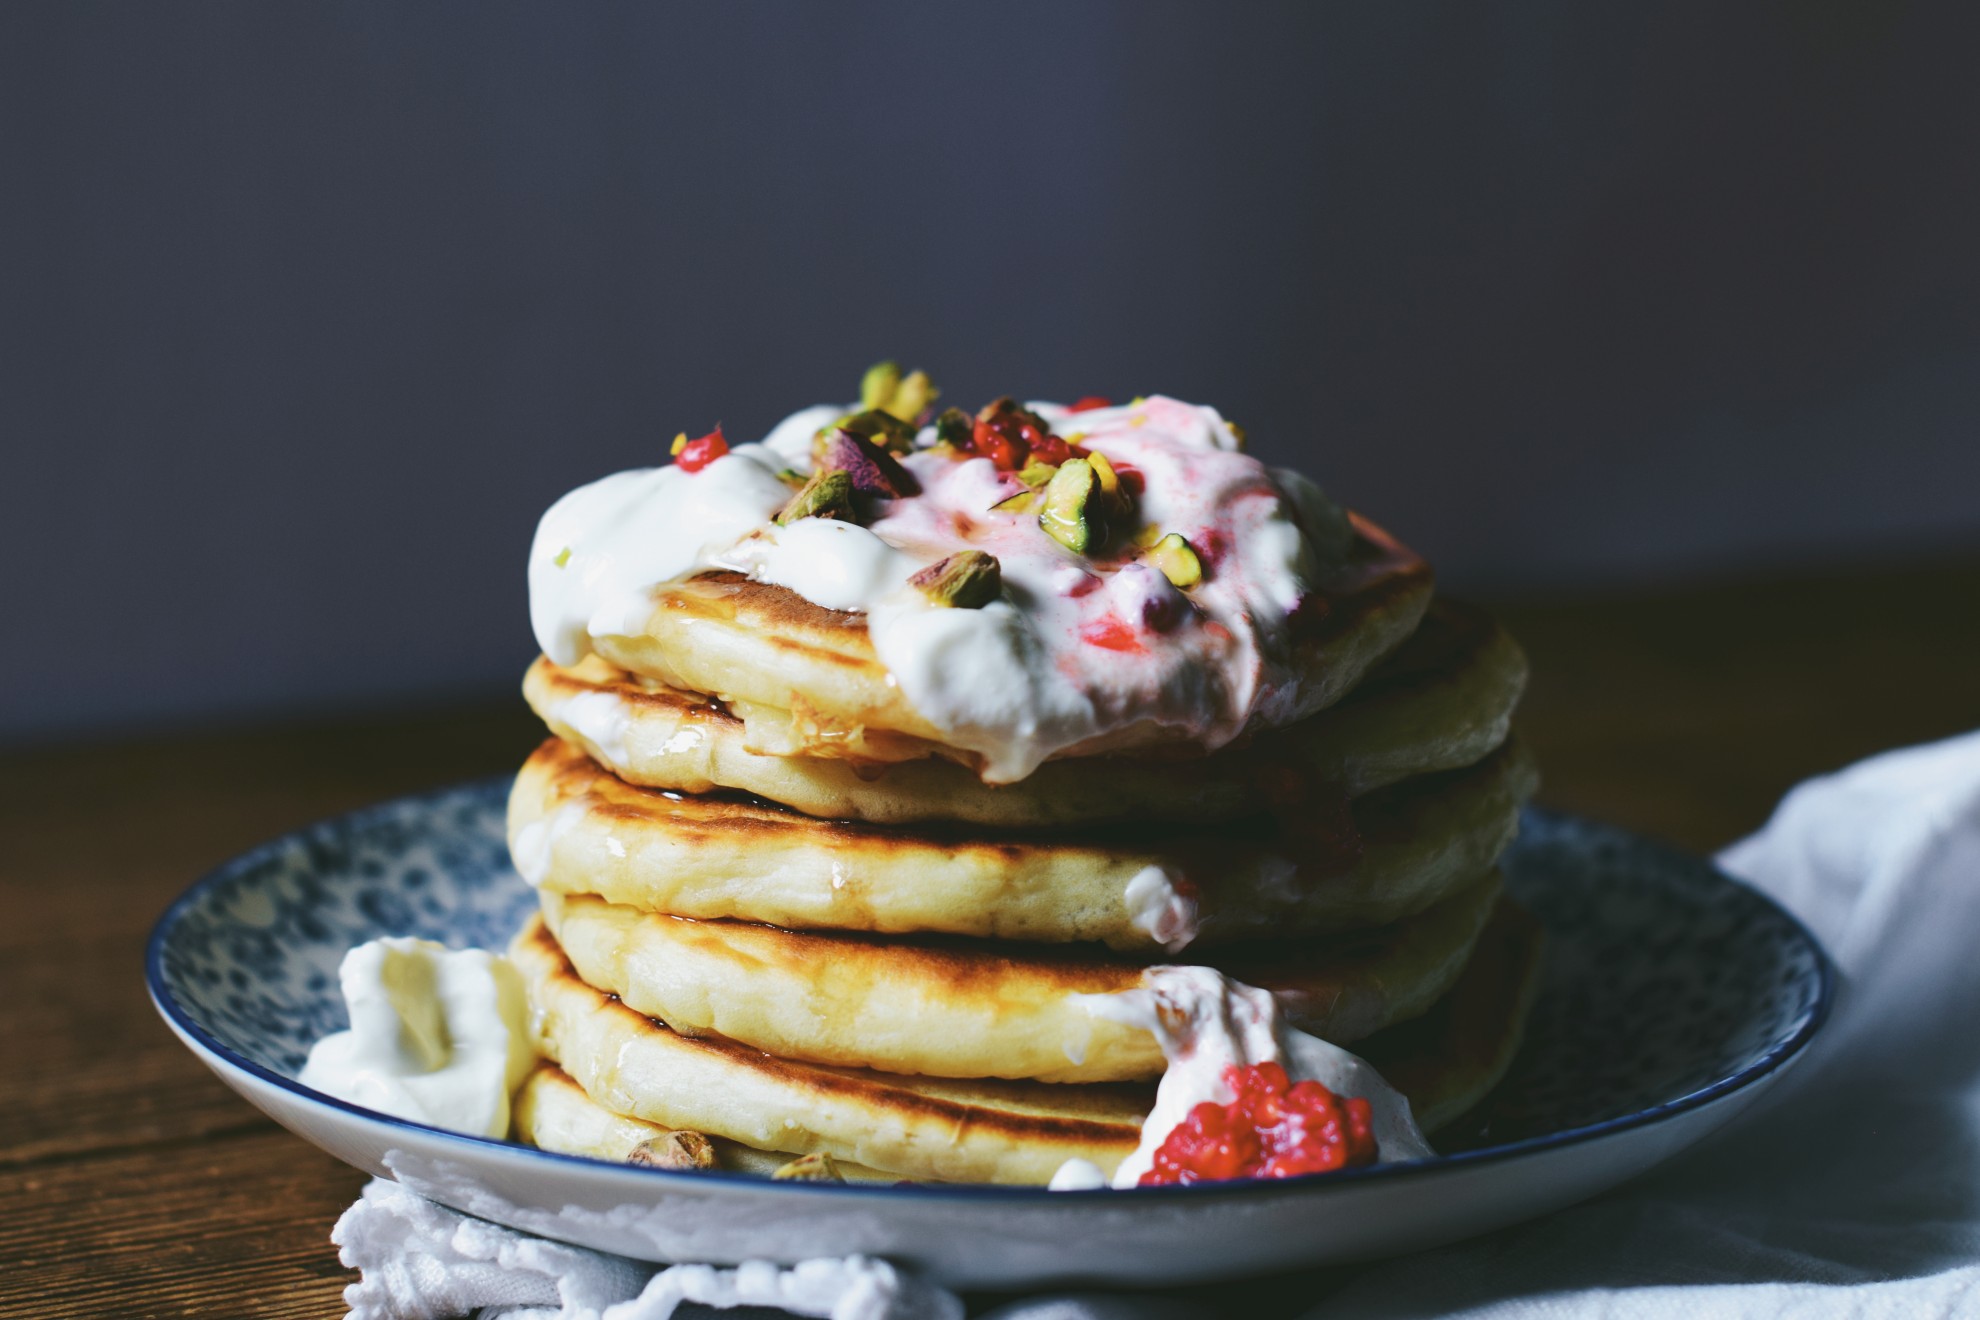 Fluffy orange blossom and buttermilk pancakes